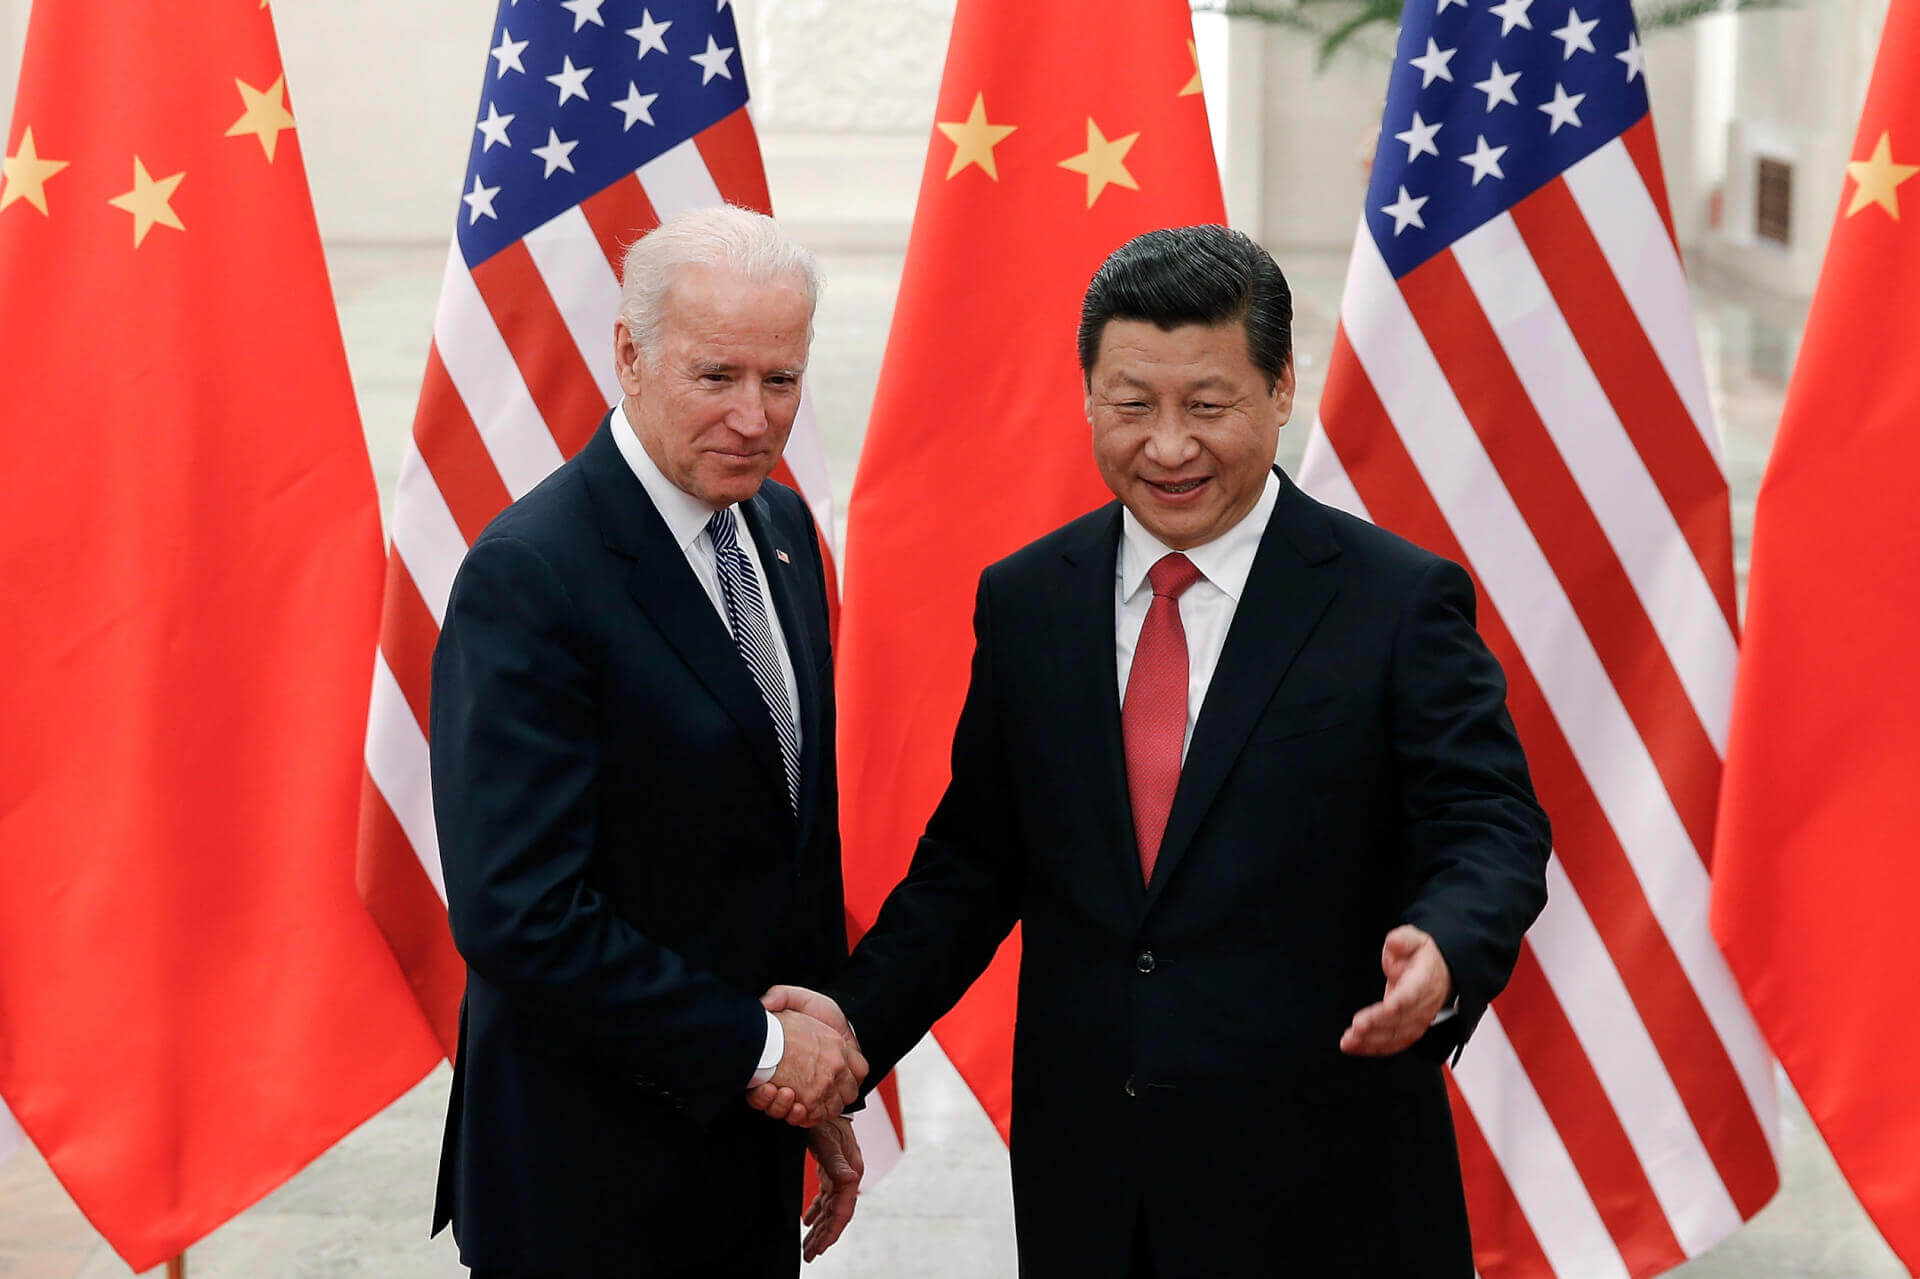 US Bipartisan Committee Recommends More Trade Restrictions, Bans on Chinese Interests